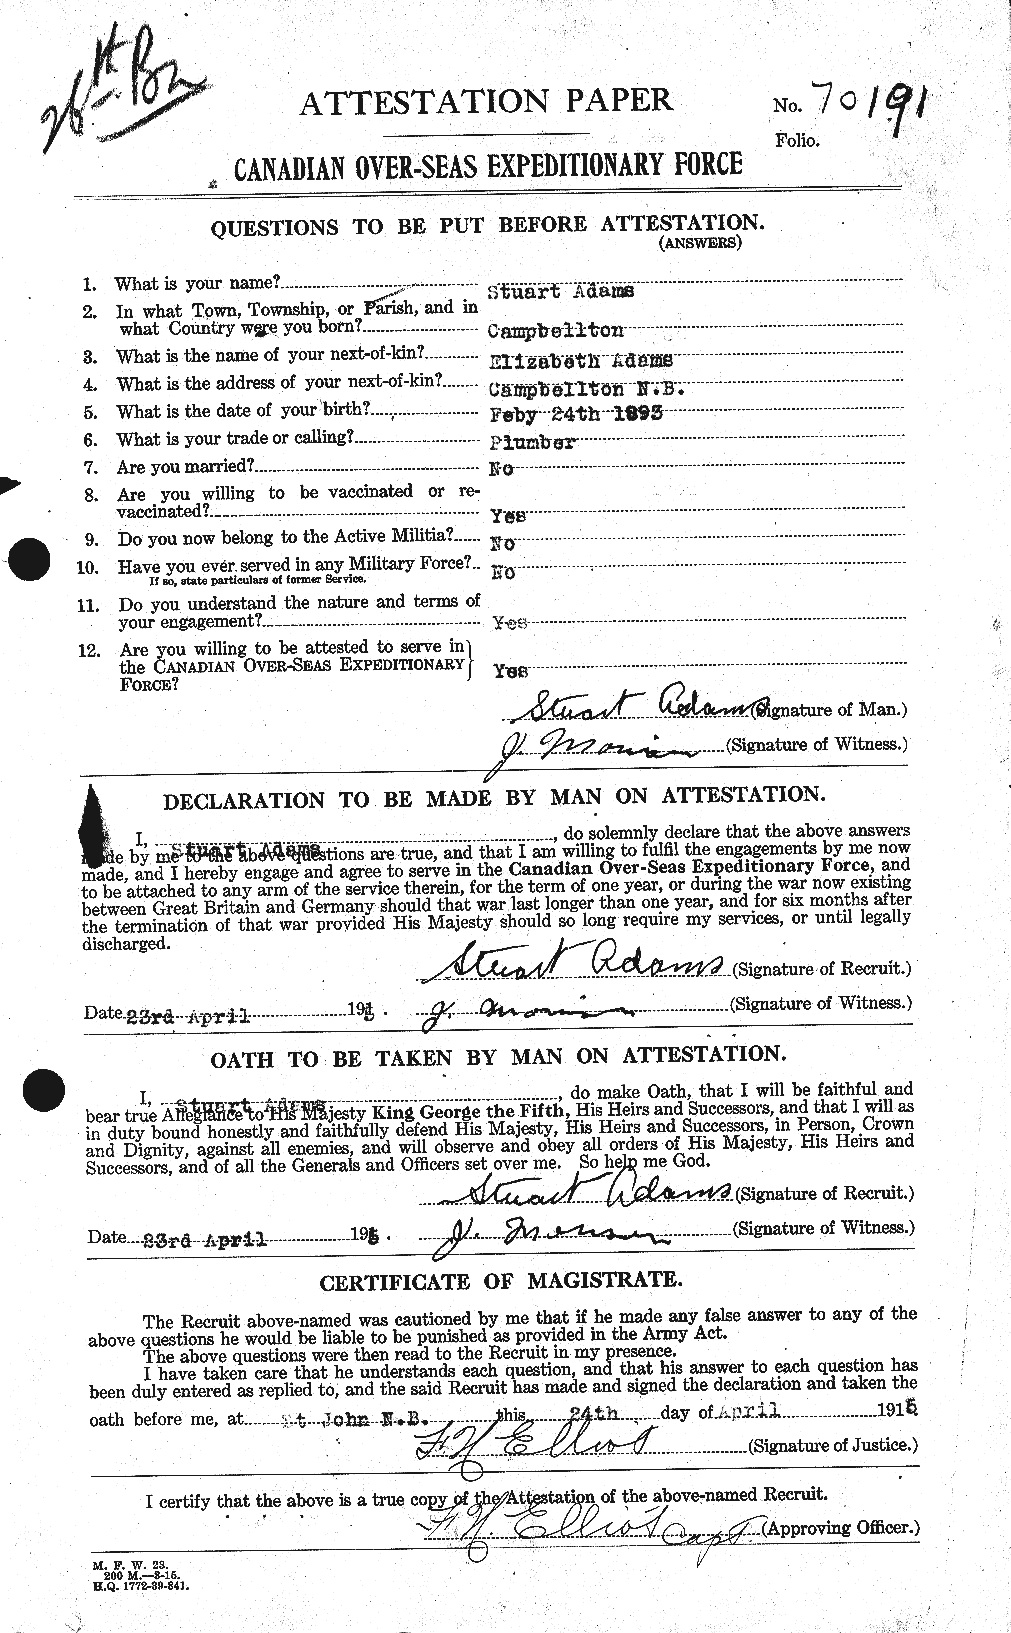 Personnel Records of the First World War - CEF 202151a